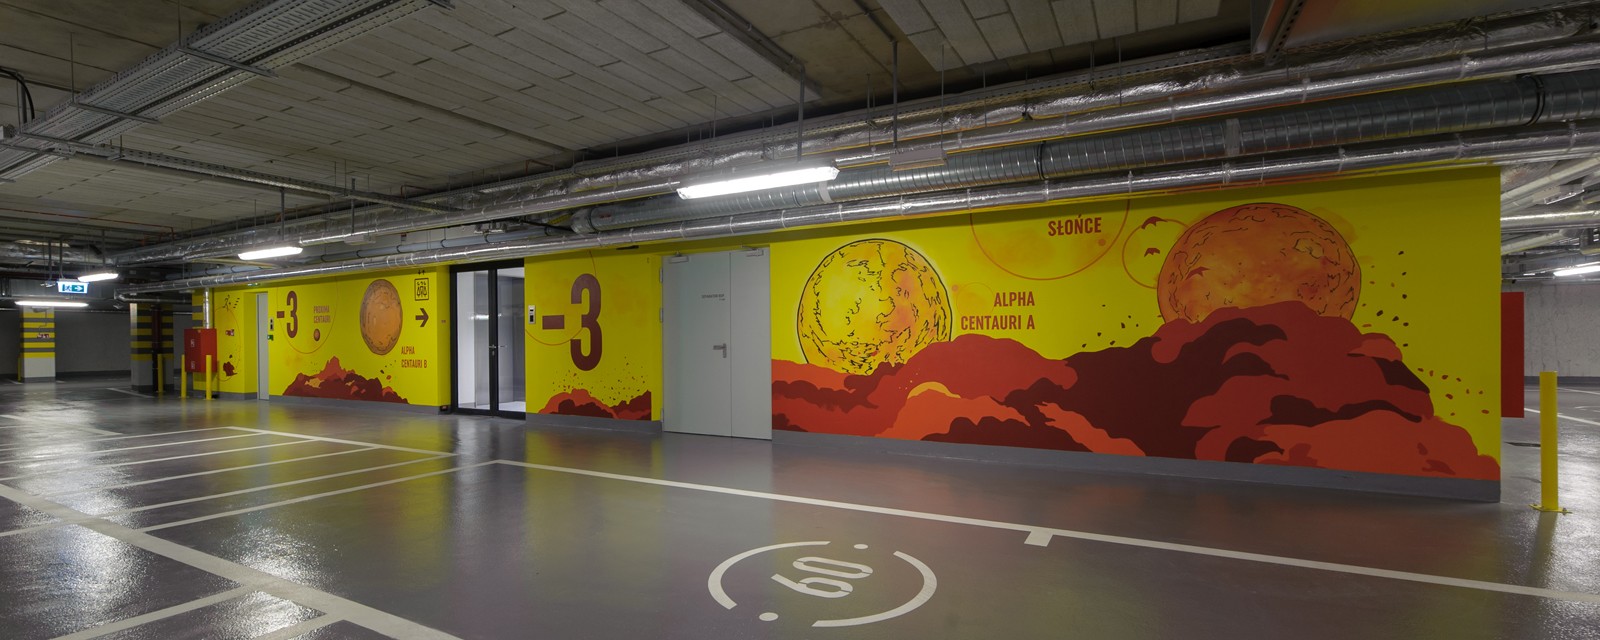 Painted sun and stars on garage walls in Warsaw’s Proximo office building | PROXIMO | Portfolio